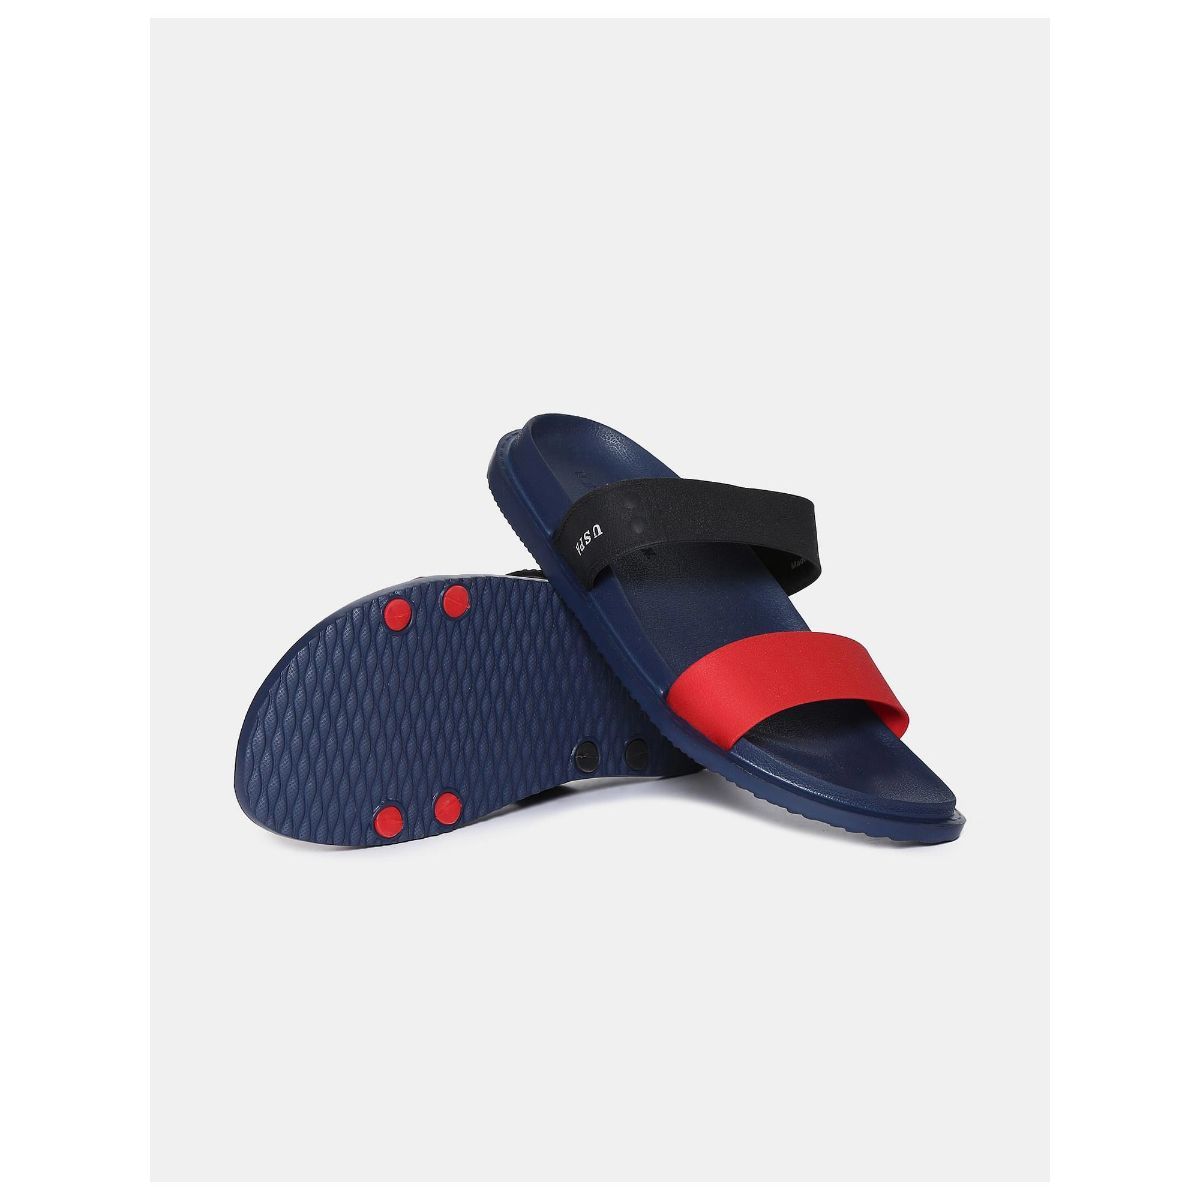 U.S. POLO ASSN. Black Slippers: Buy U.S. POLO ASSN. Black Slippers Online  at Best Price in India | NykaaMan